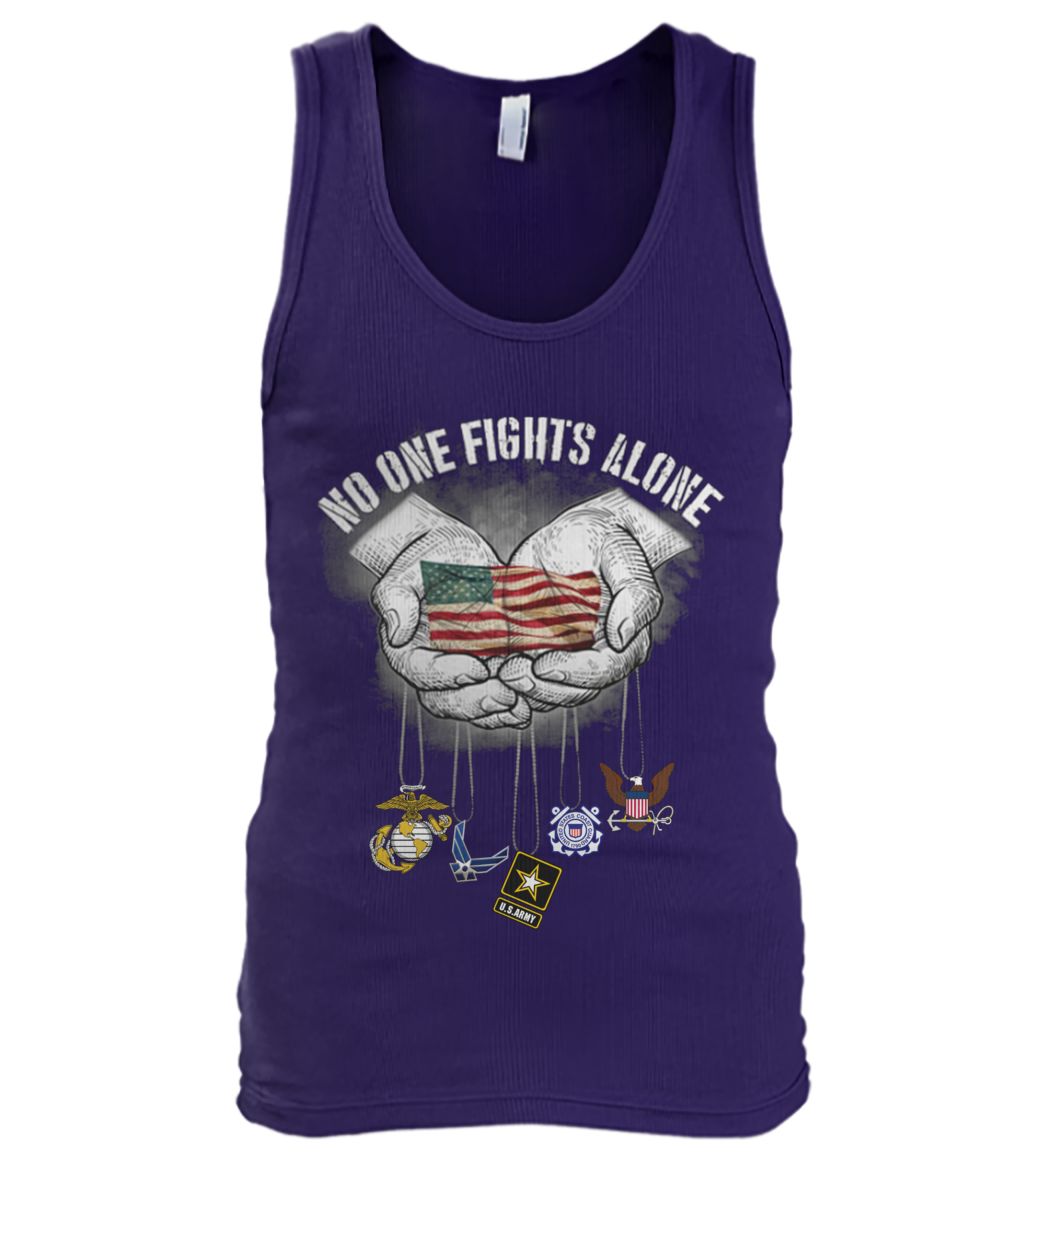 No one fights alone american flag in hands men's tank top